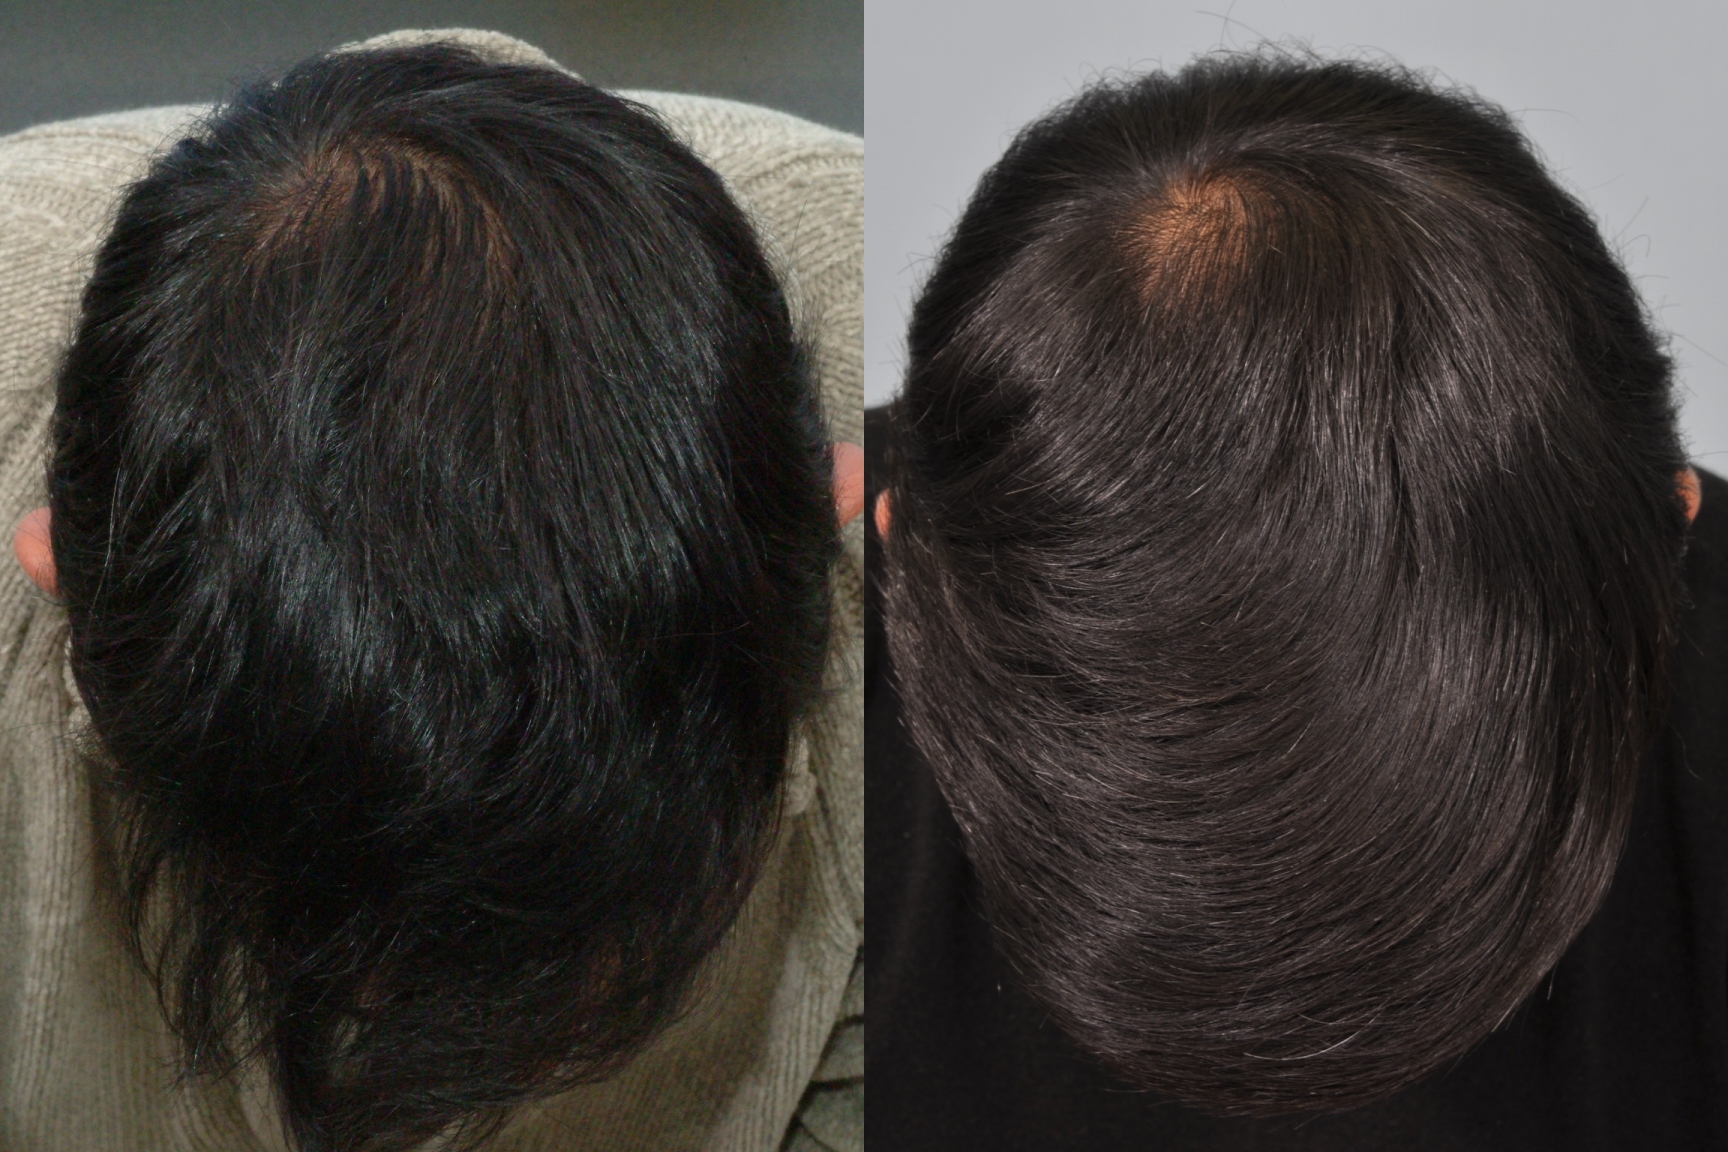 Minoxidil & Finasteride results after 10 years